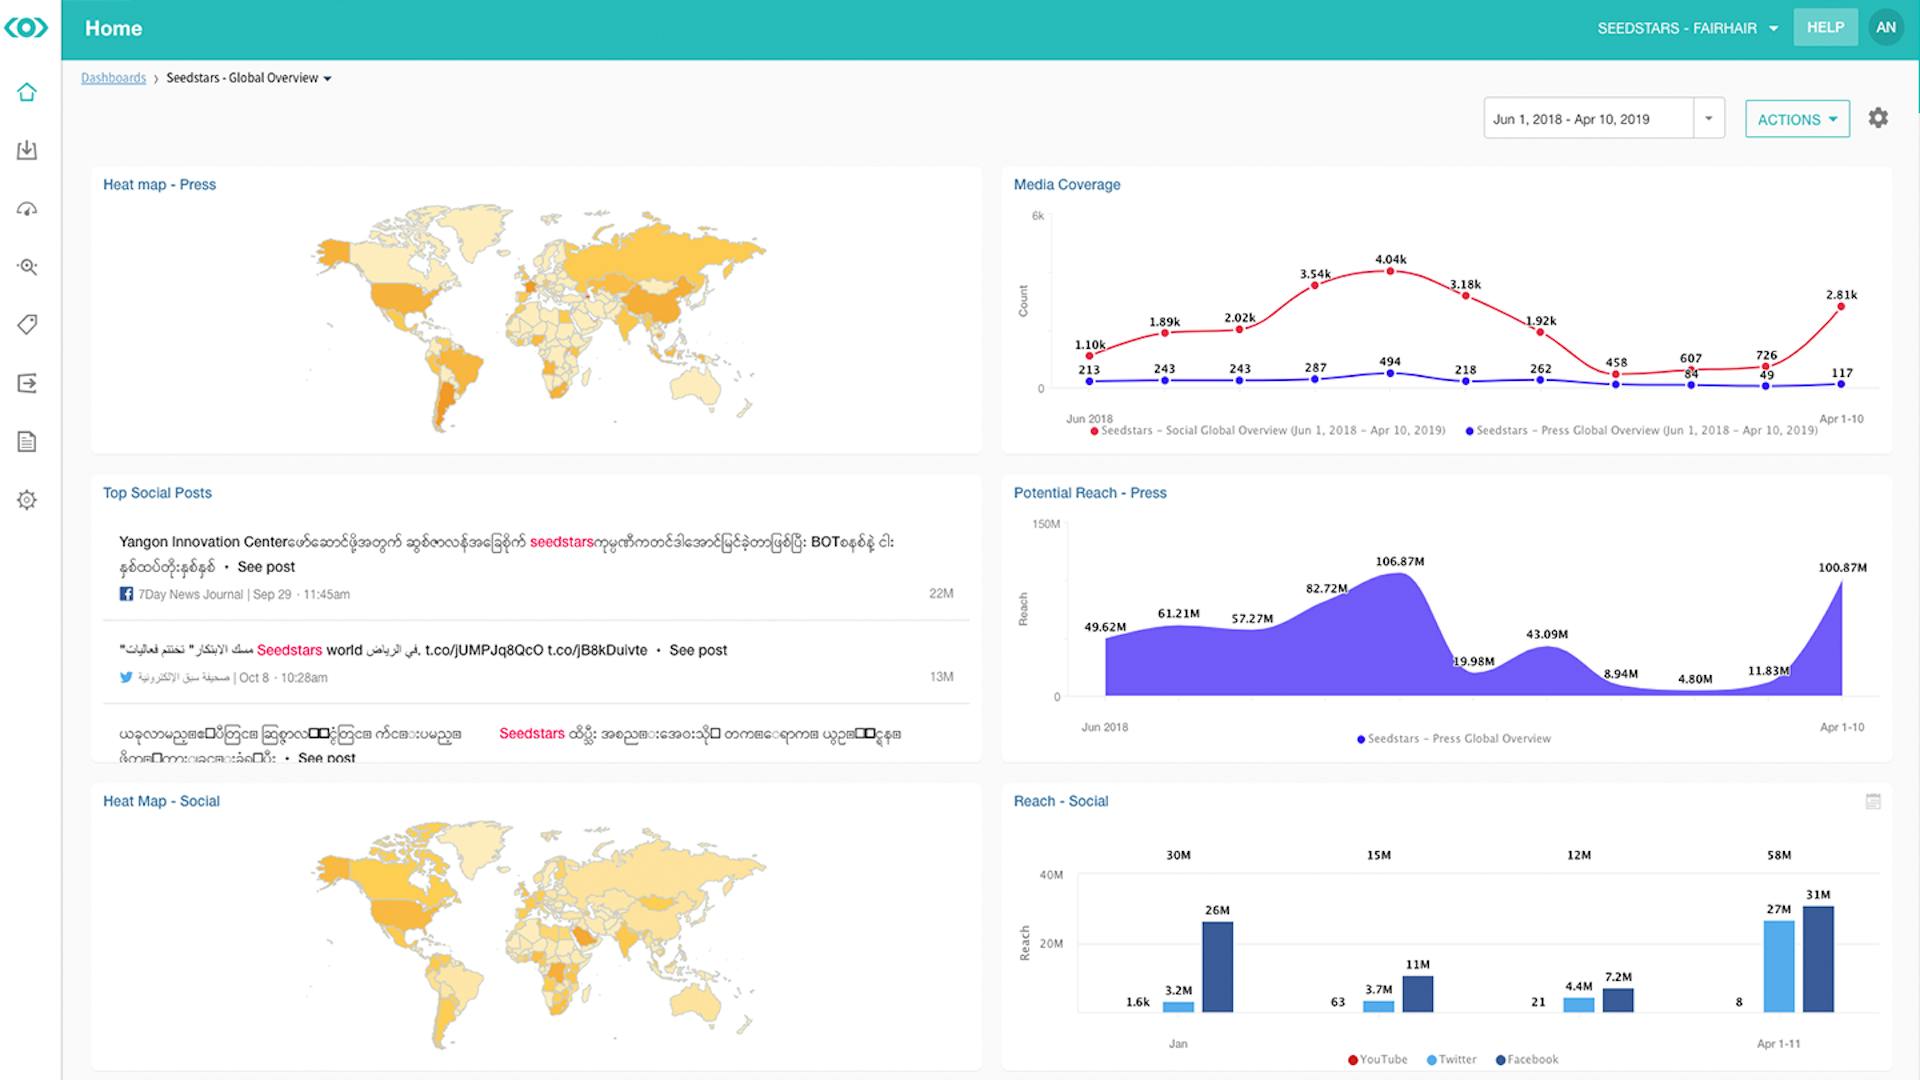 Screenshot of the Meltwater platform with dashboards